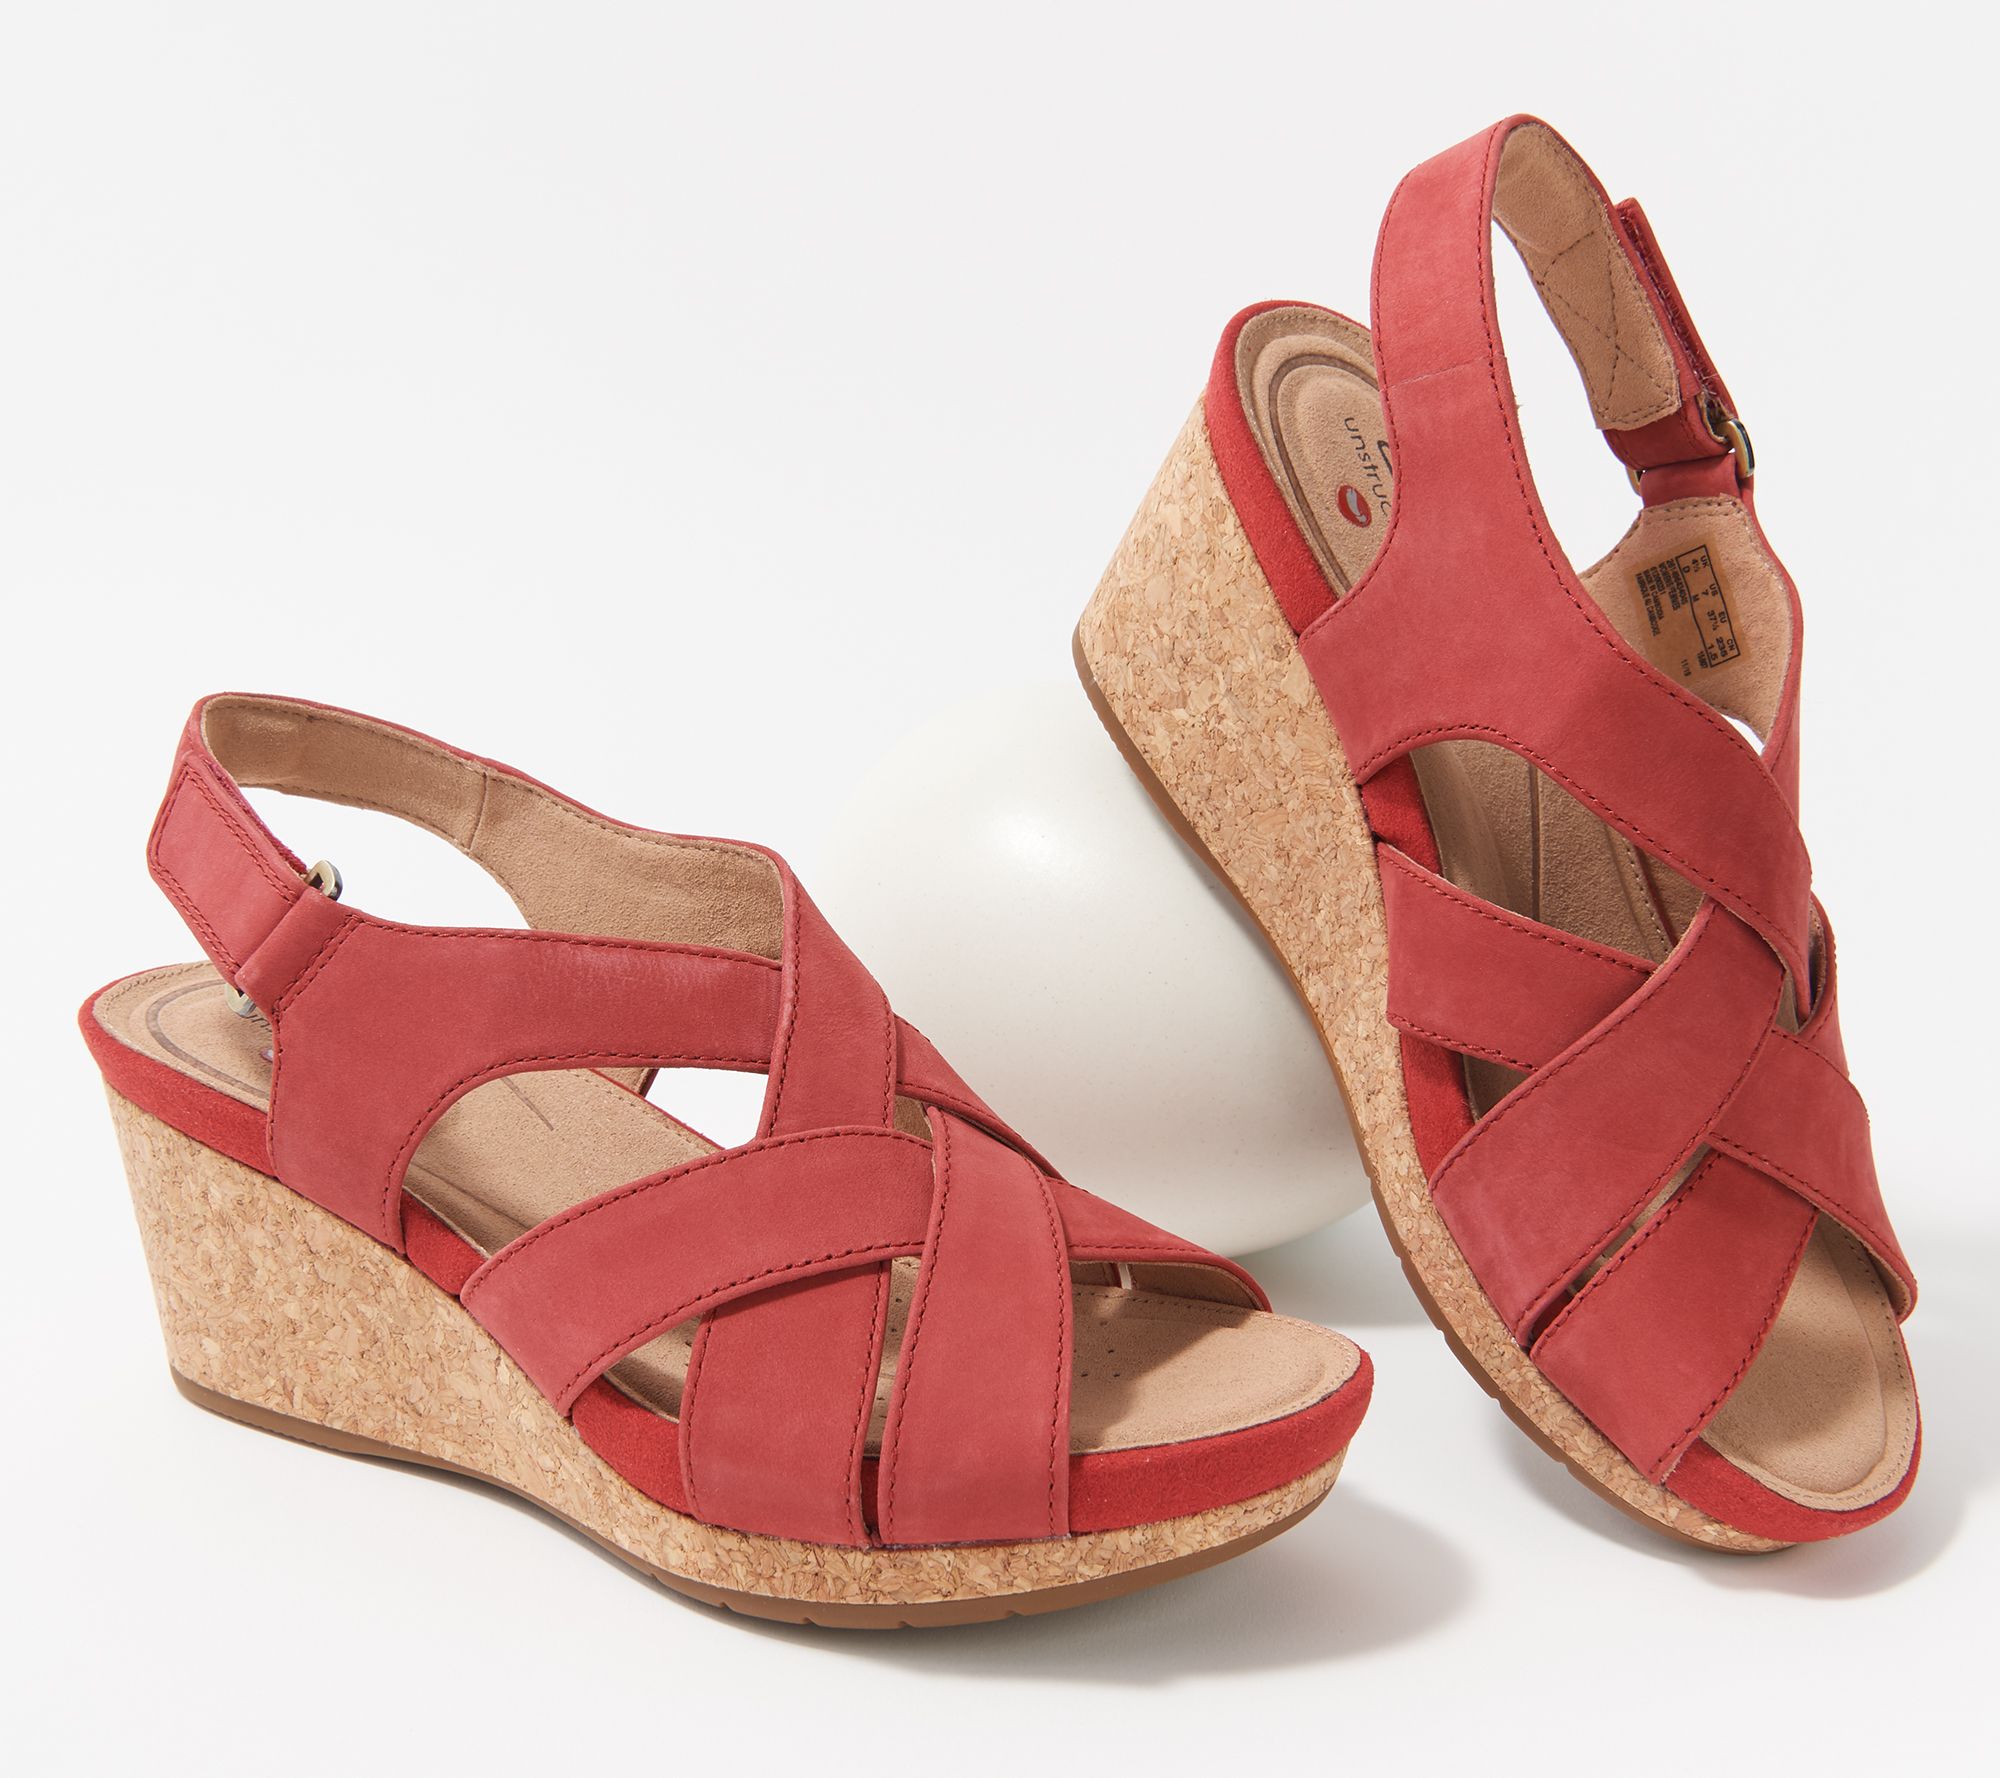 clarks unstructured wedge shoes